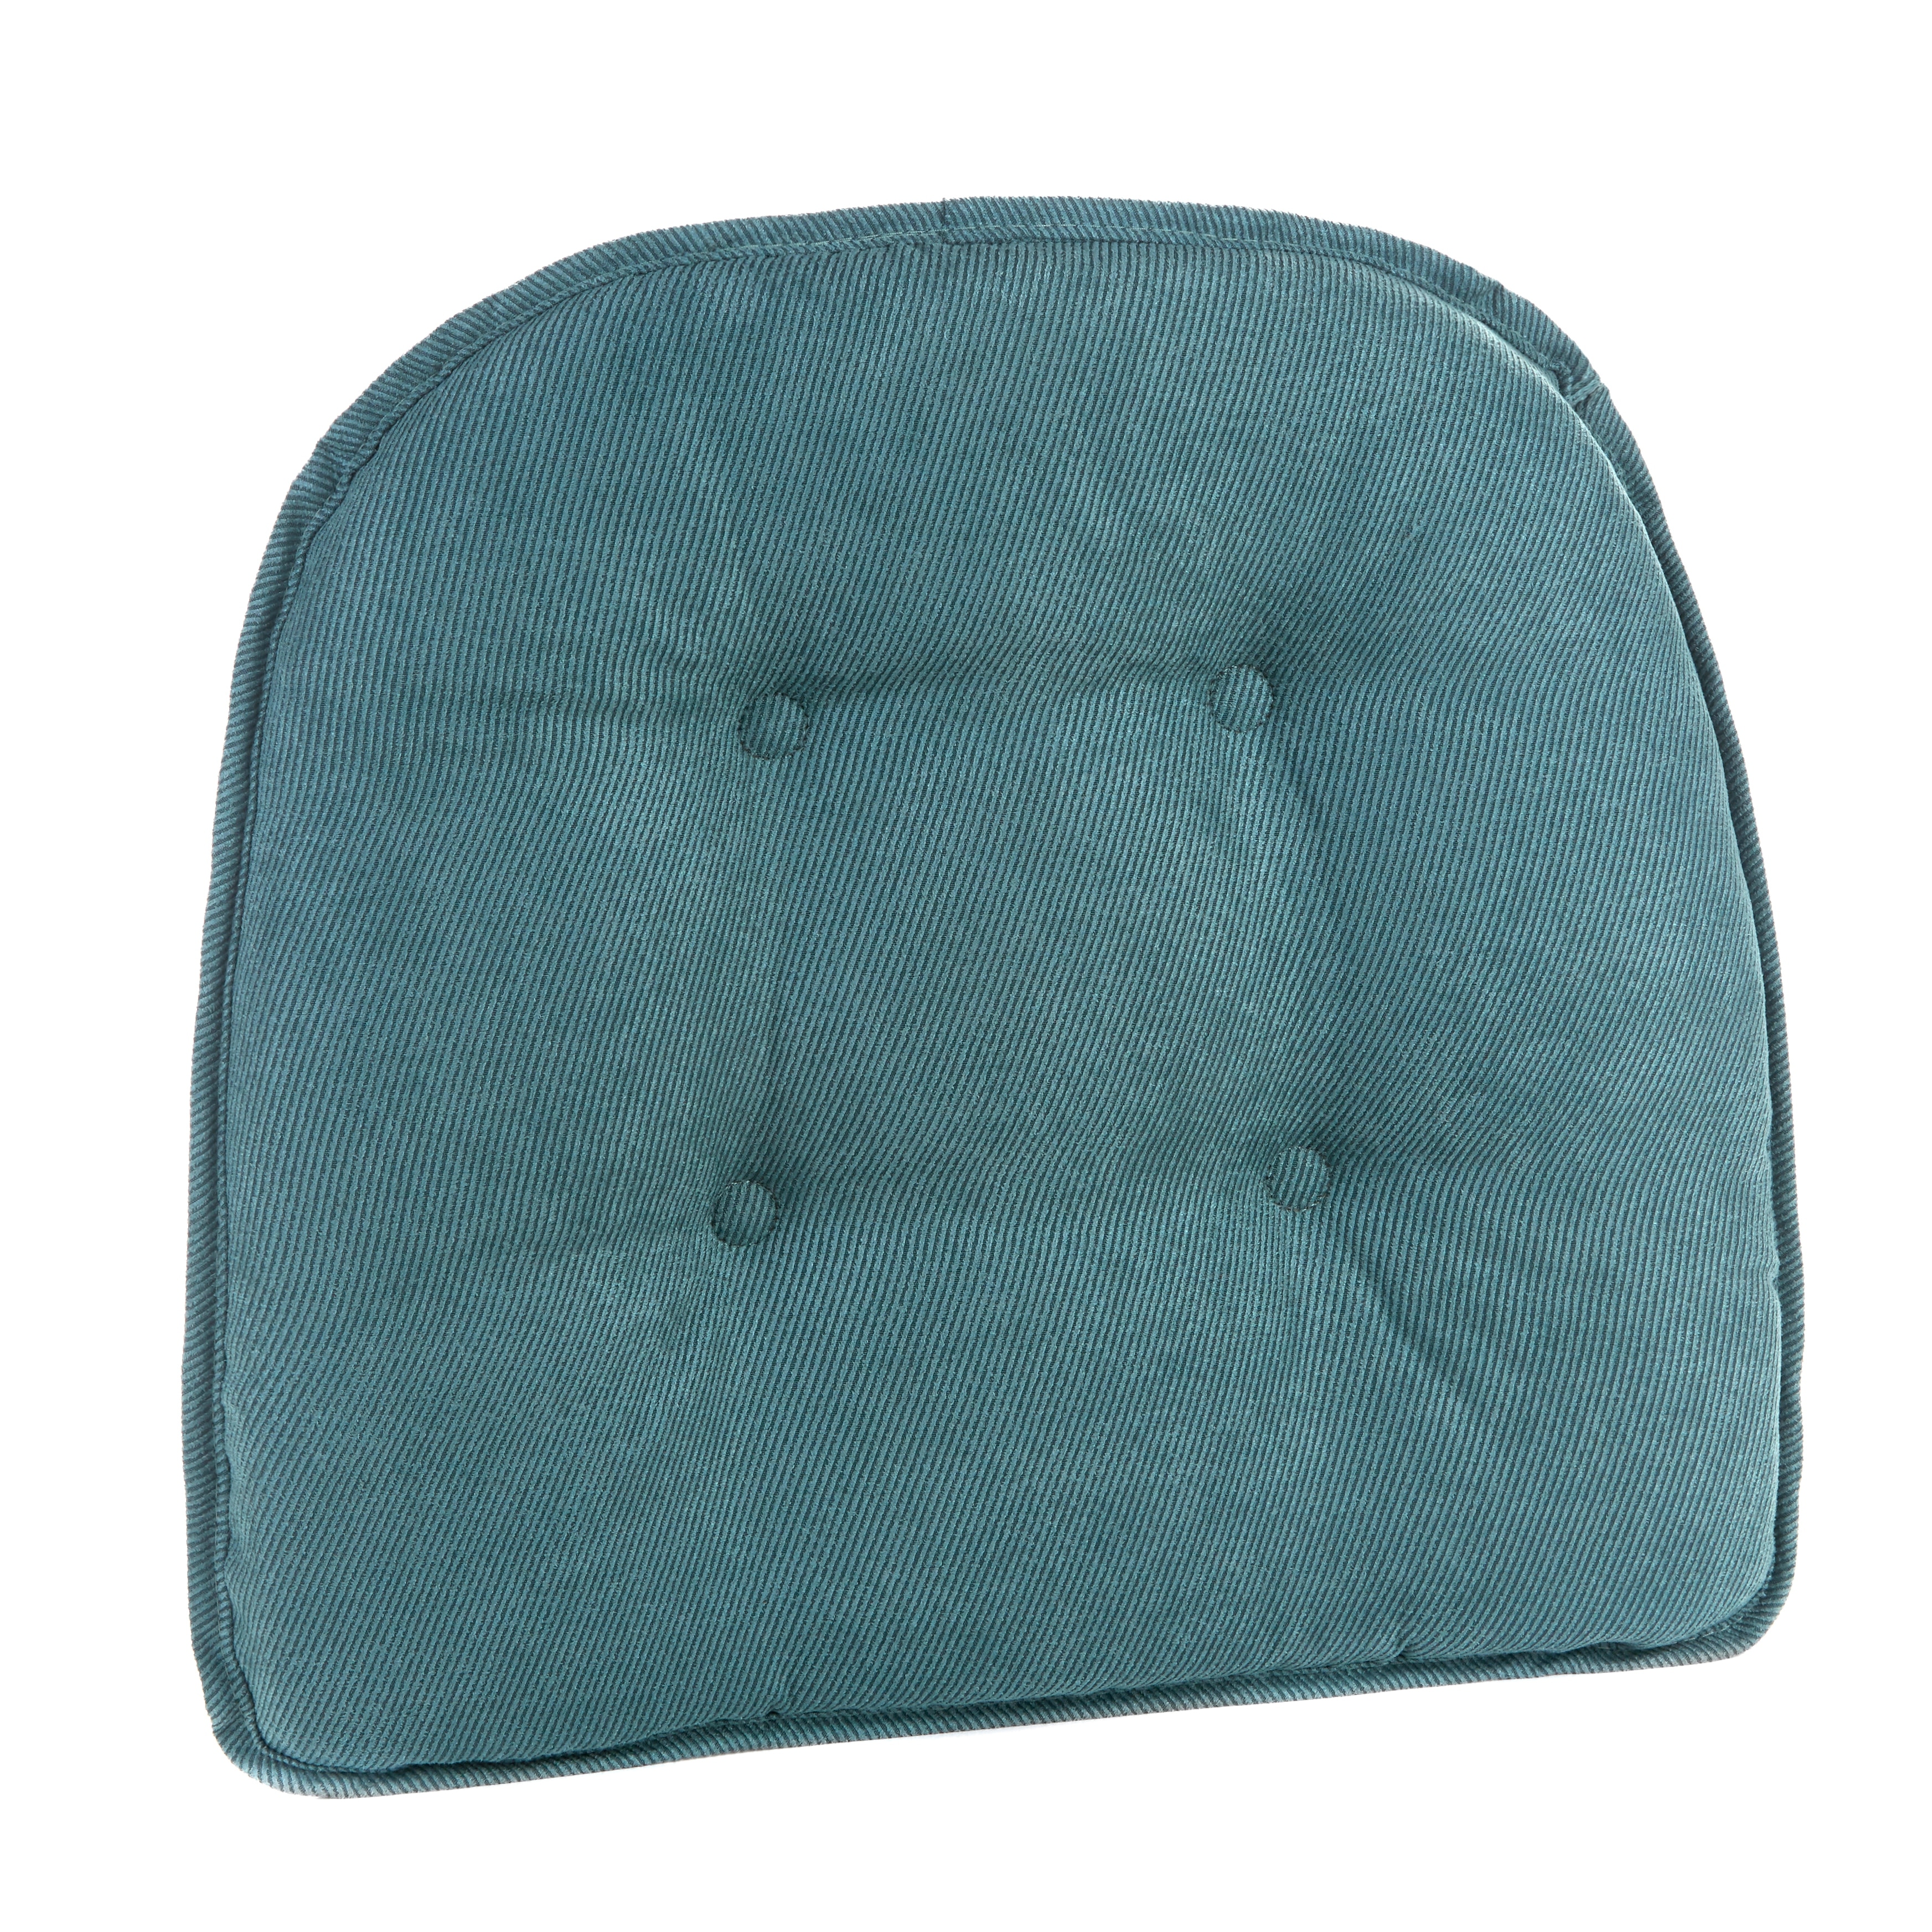 https://ak1.ostkcdn.com/images/products/is/images/direct/a5491ae40e60d1edb01258b56a8a78d3a0f48d84/Twillo-Marine-Tufted-Chair-Pad-%28Set-of-2%29.jpg